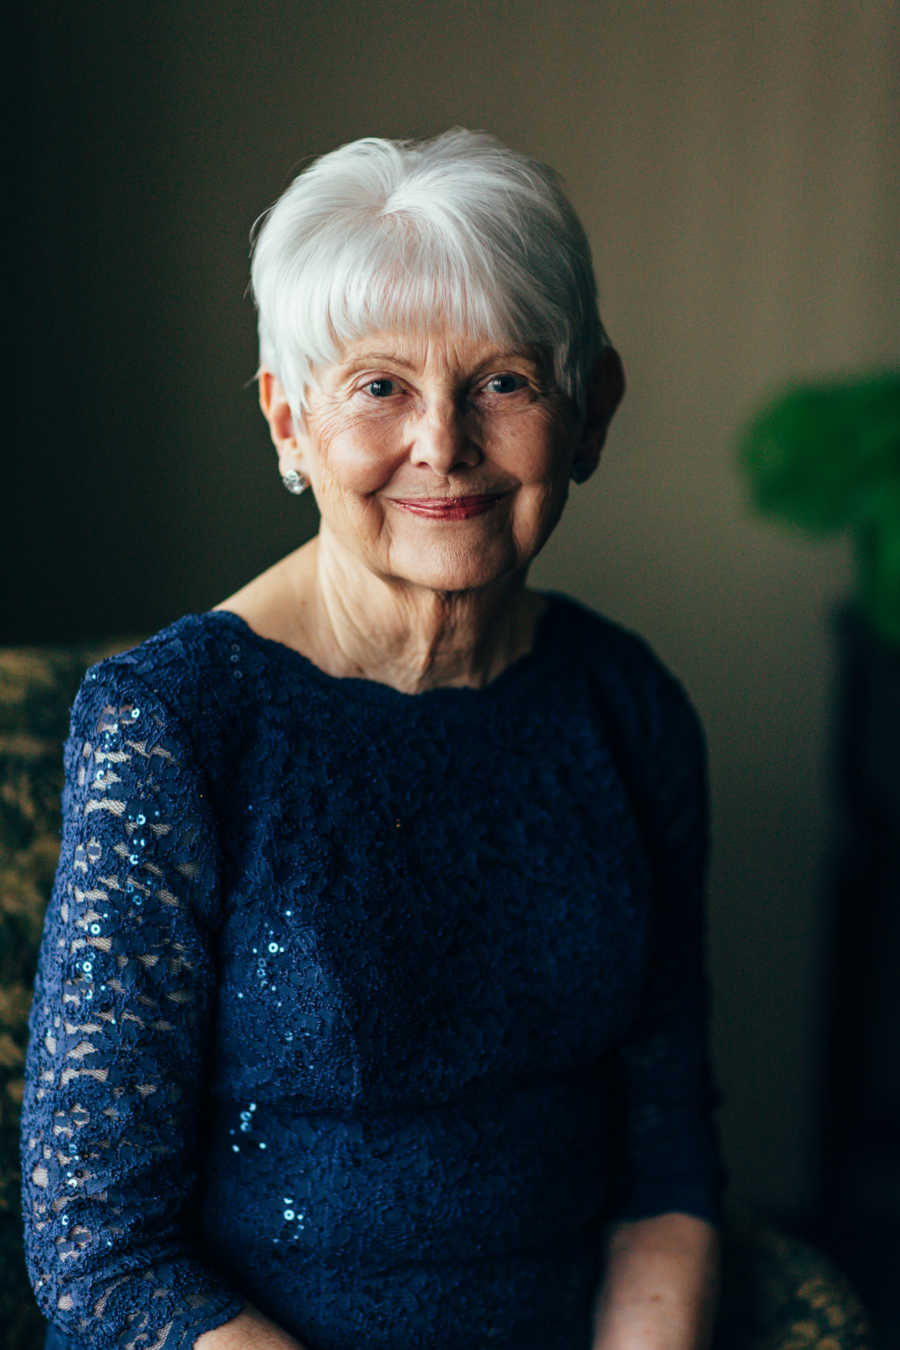 77 year old bride smiles before ceremony